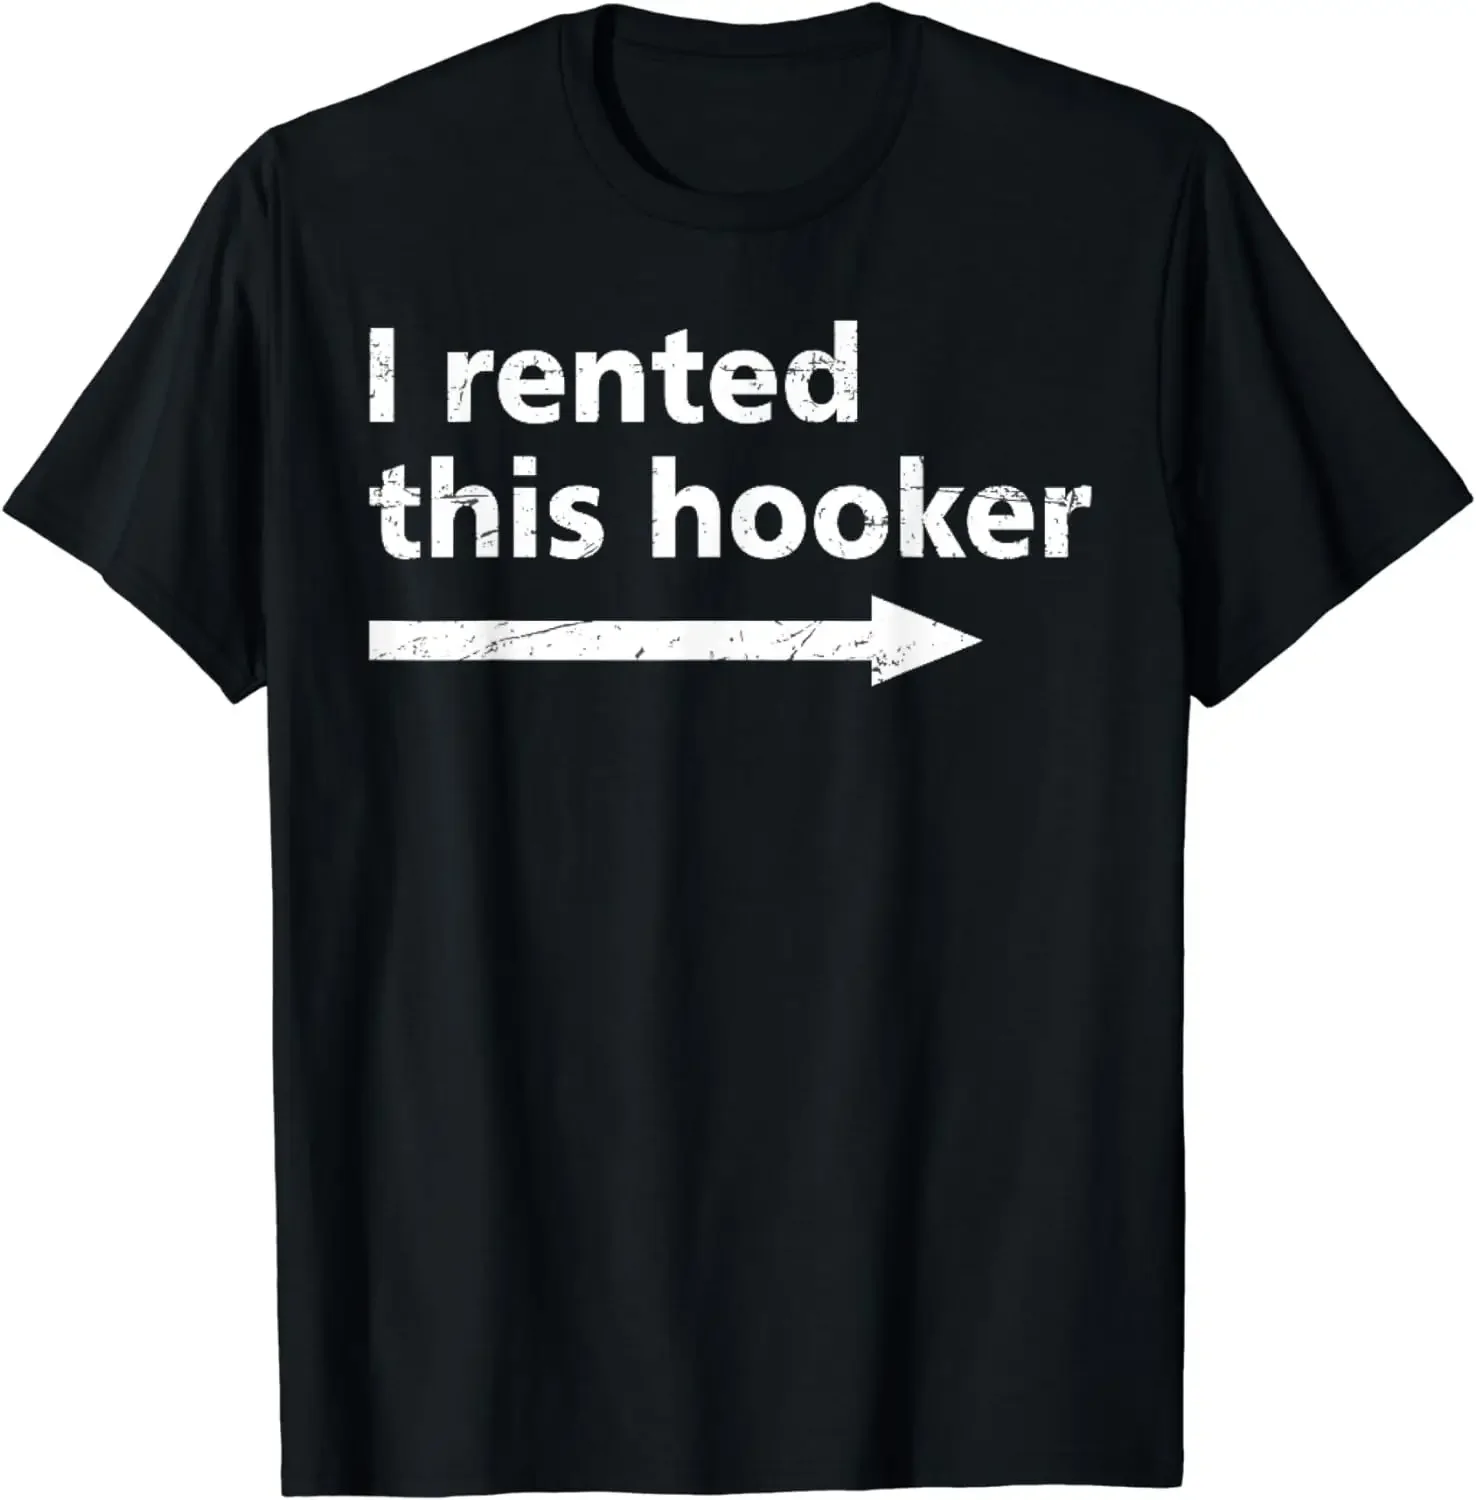 

Offensive I Rented This Hooker, Funny Adult Humor Saying T-Shirt Funny T-shirt Vintage T Shirt Men Clothing Camisas